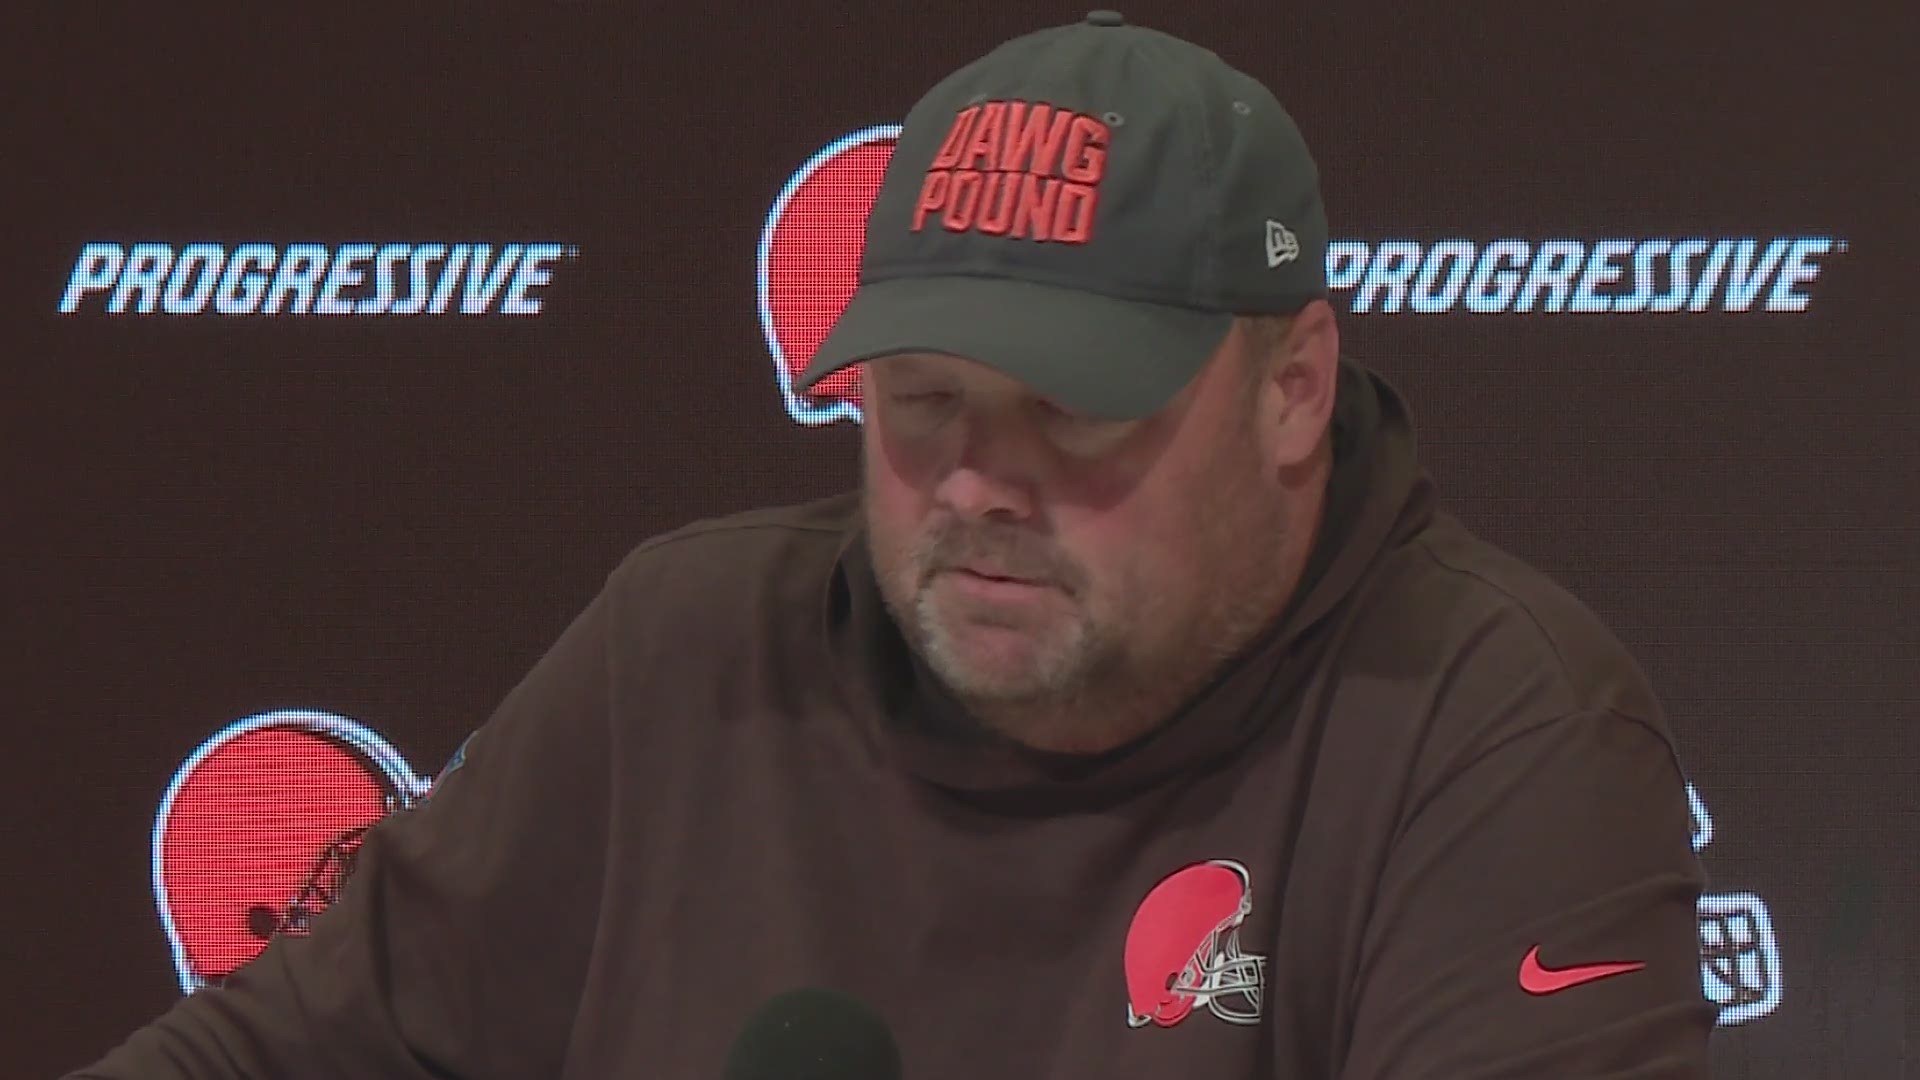 Cleveland Browns head coach Freddie Kitchens said he's more focused on his team's effort than the outcome against the Titans in Sunday's season opener. The 44 year old will make his head coaching debut at FirstEnergy Stadium.